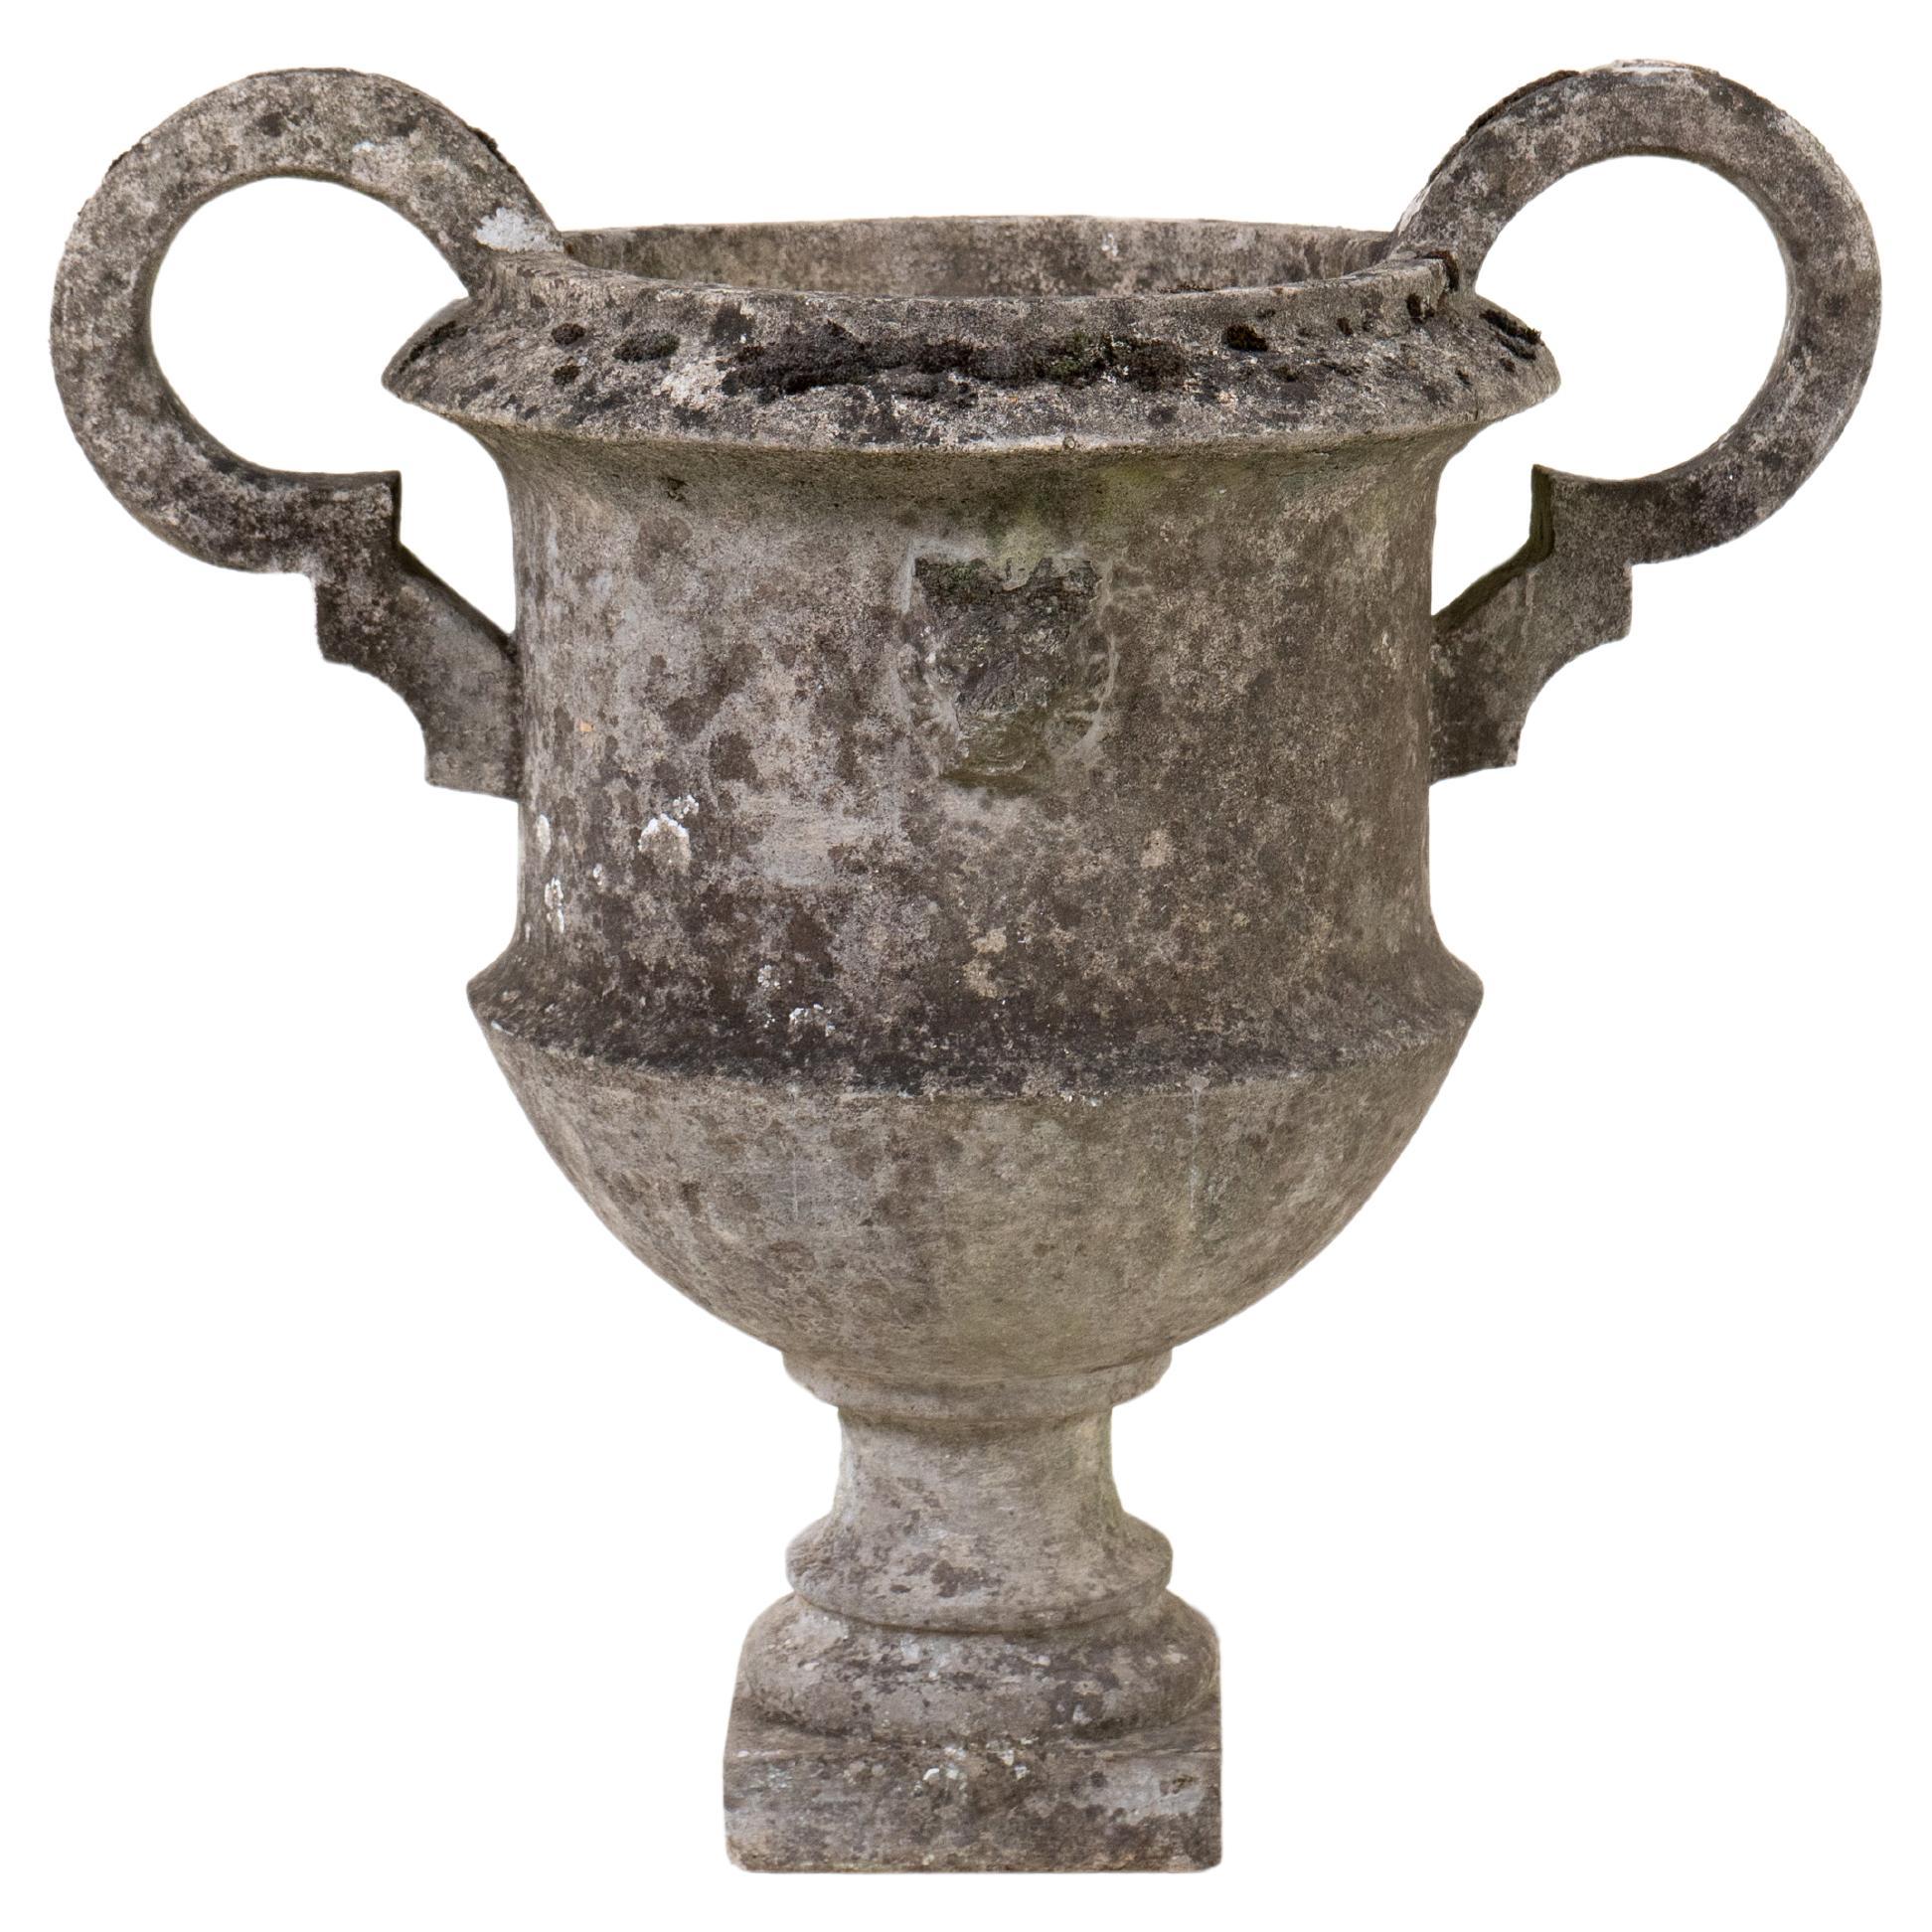 A French Jardinière With Mossy Patina, c.1900